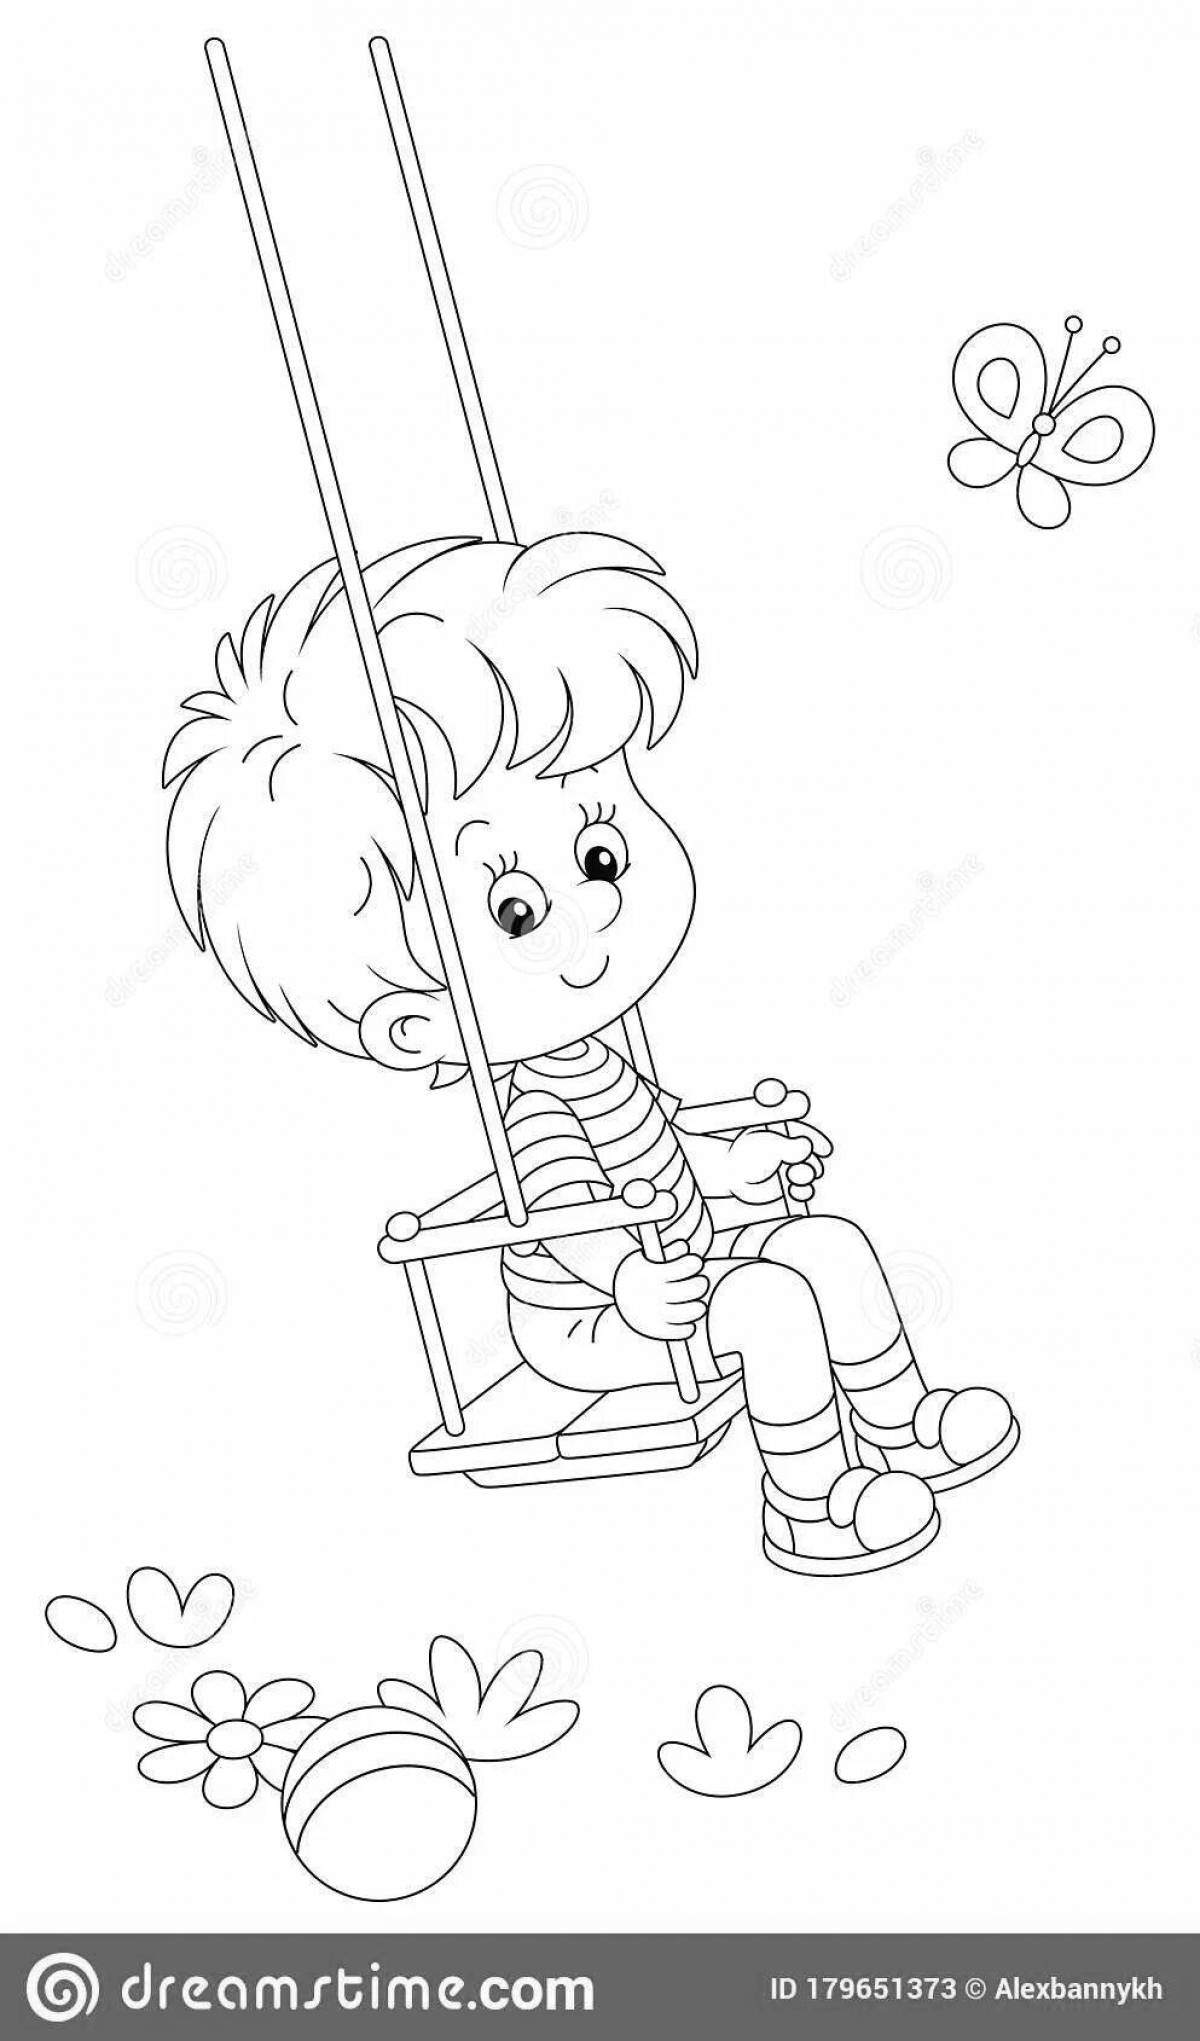 Sparkly Swing Coloring Page for Toddlers